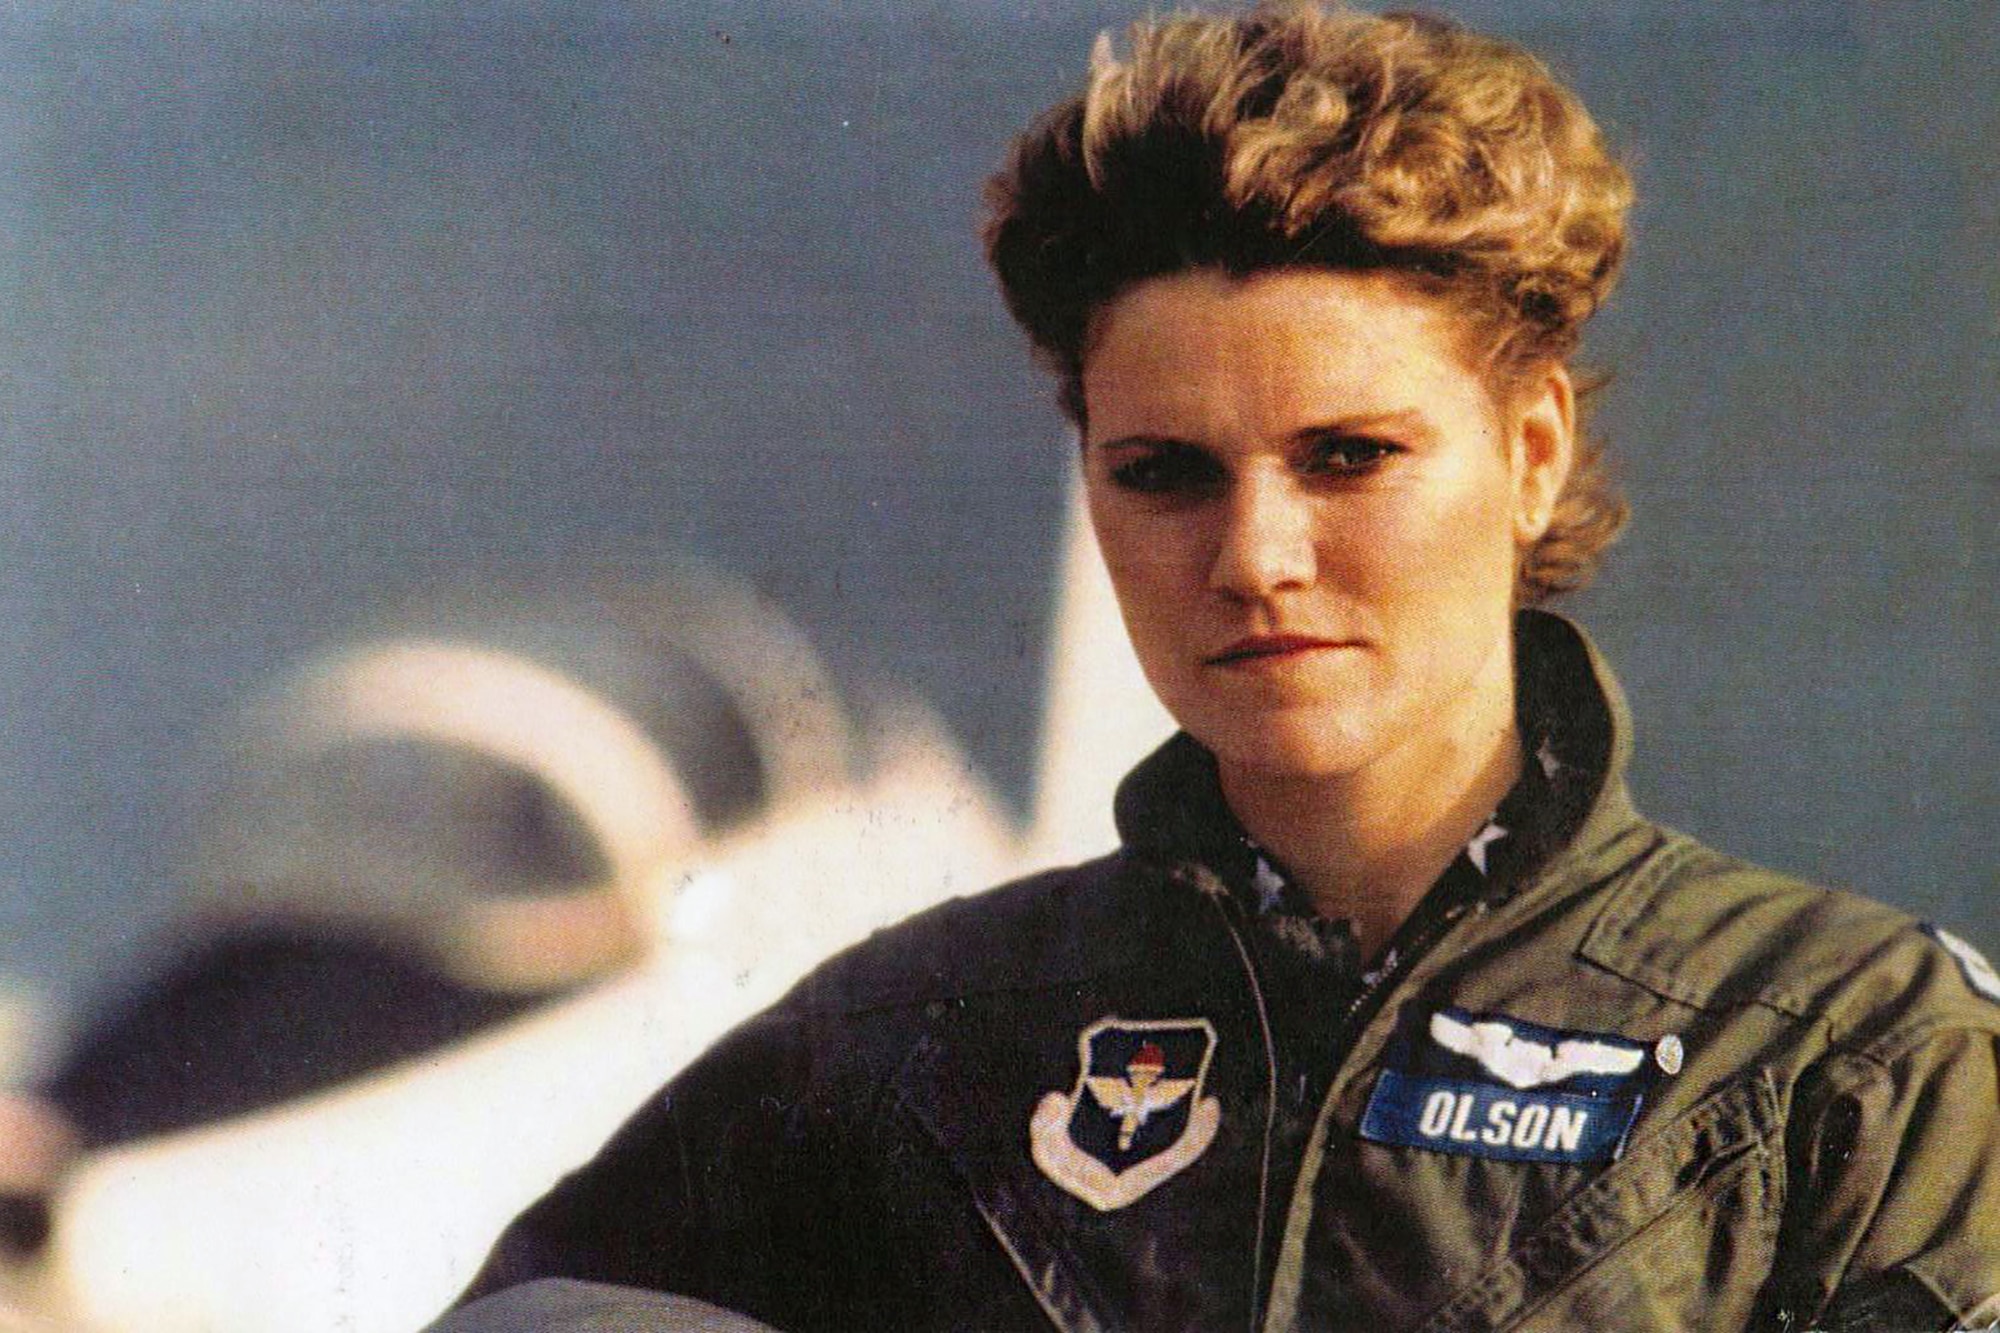 Retired Air Force Col. Kimberly Olson, pictured as a captain, helped to influence the change of Air Force policy to allow women the opportunity to pursue flight training during Officer Training School. After the change in policy, she became the first female pilot to attend undergraduate pilot training at Laughlin Air Force Base, Texas. (Courtesy Photo)